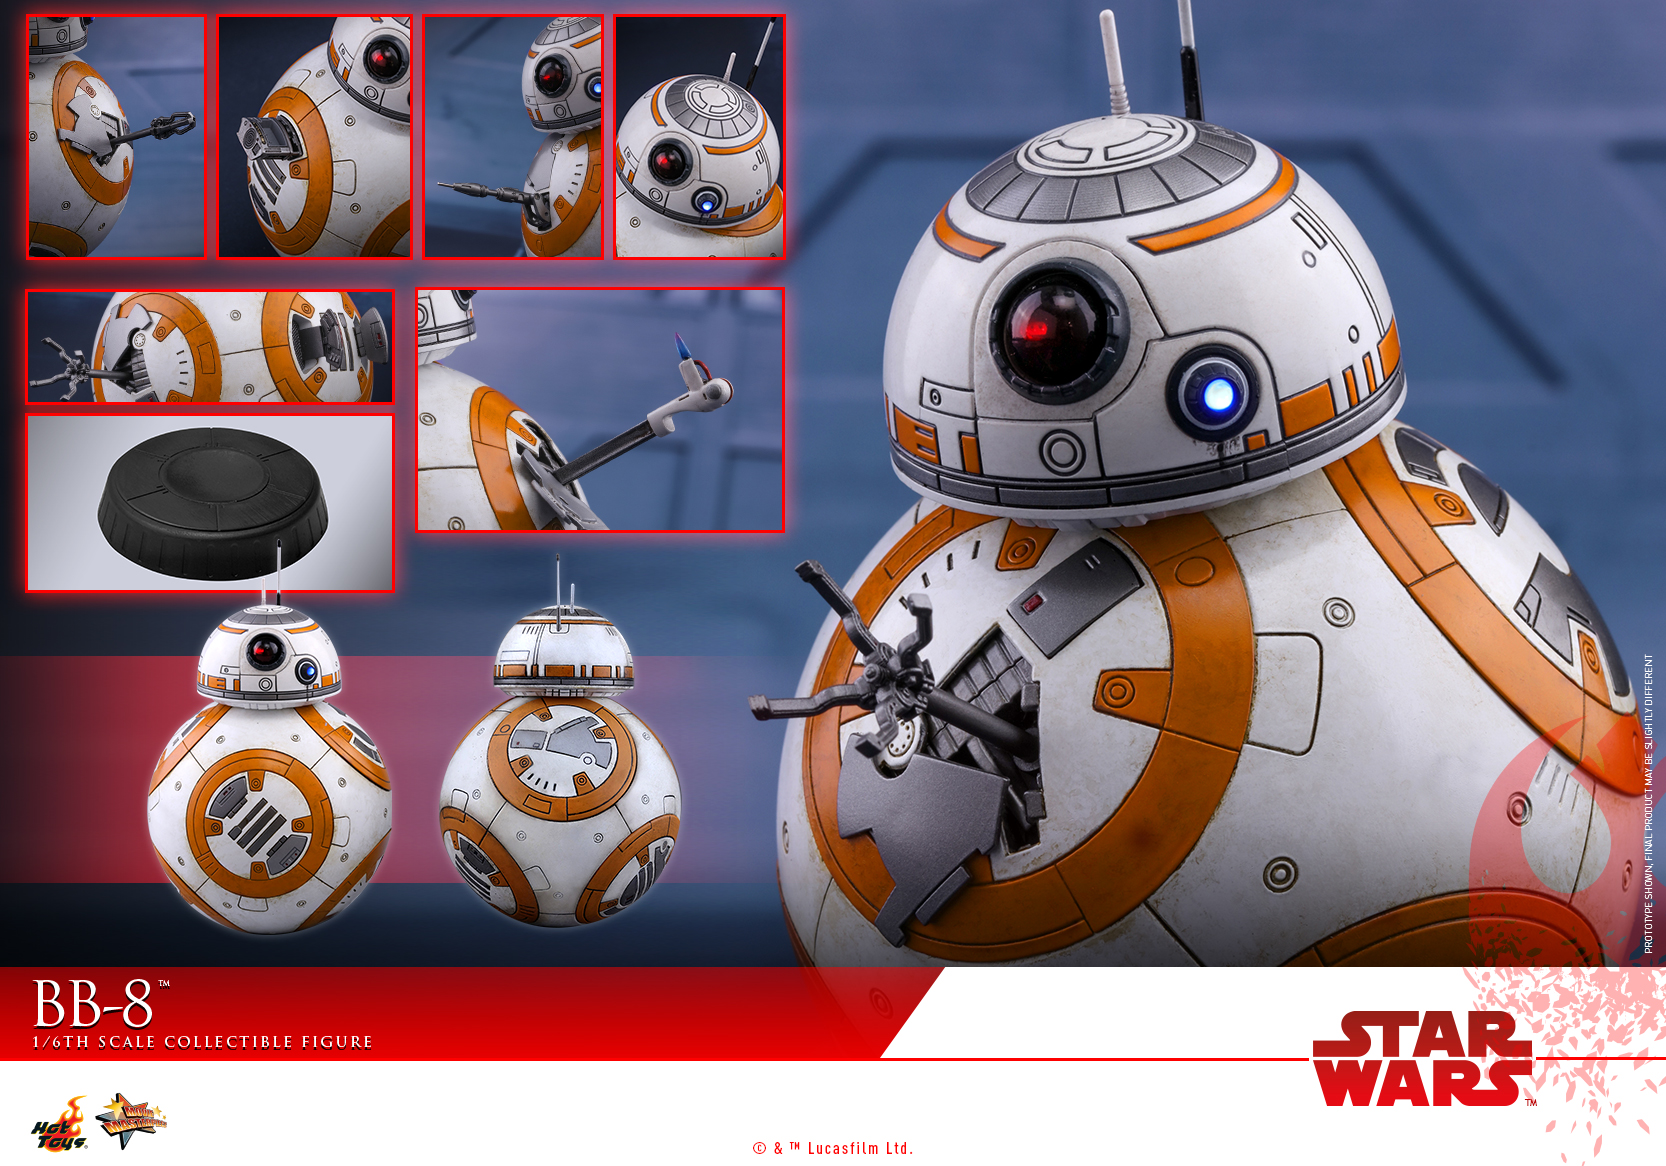 The Story (And Tech) Behind That Awesome Star Wars BB-8 Toy | WIRED